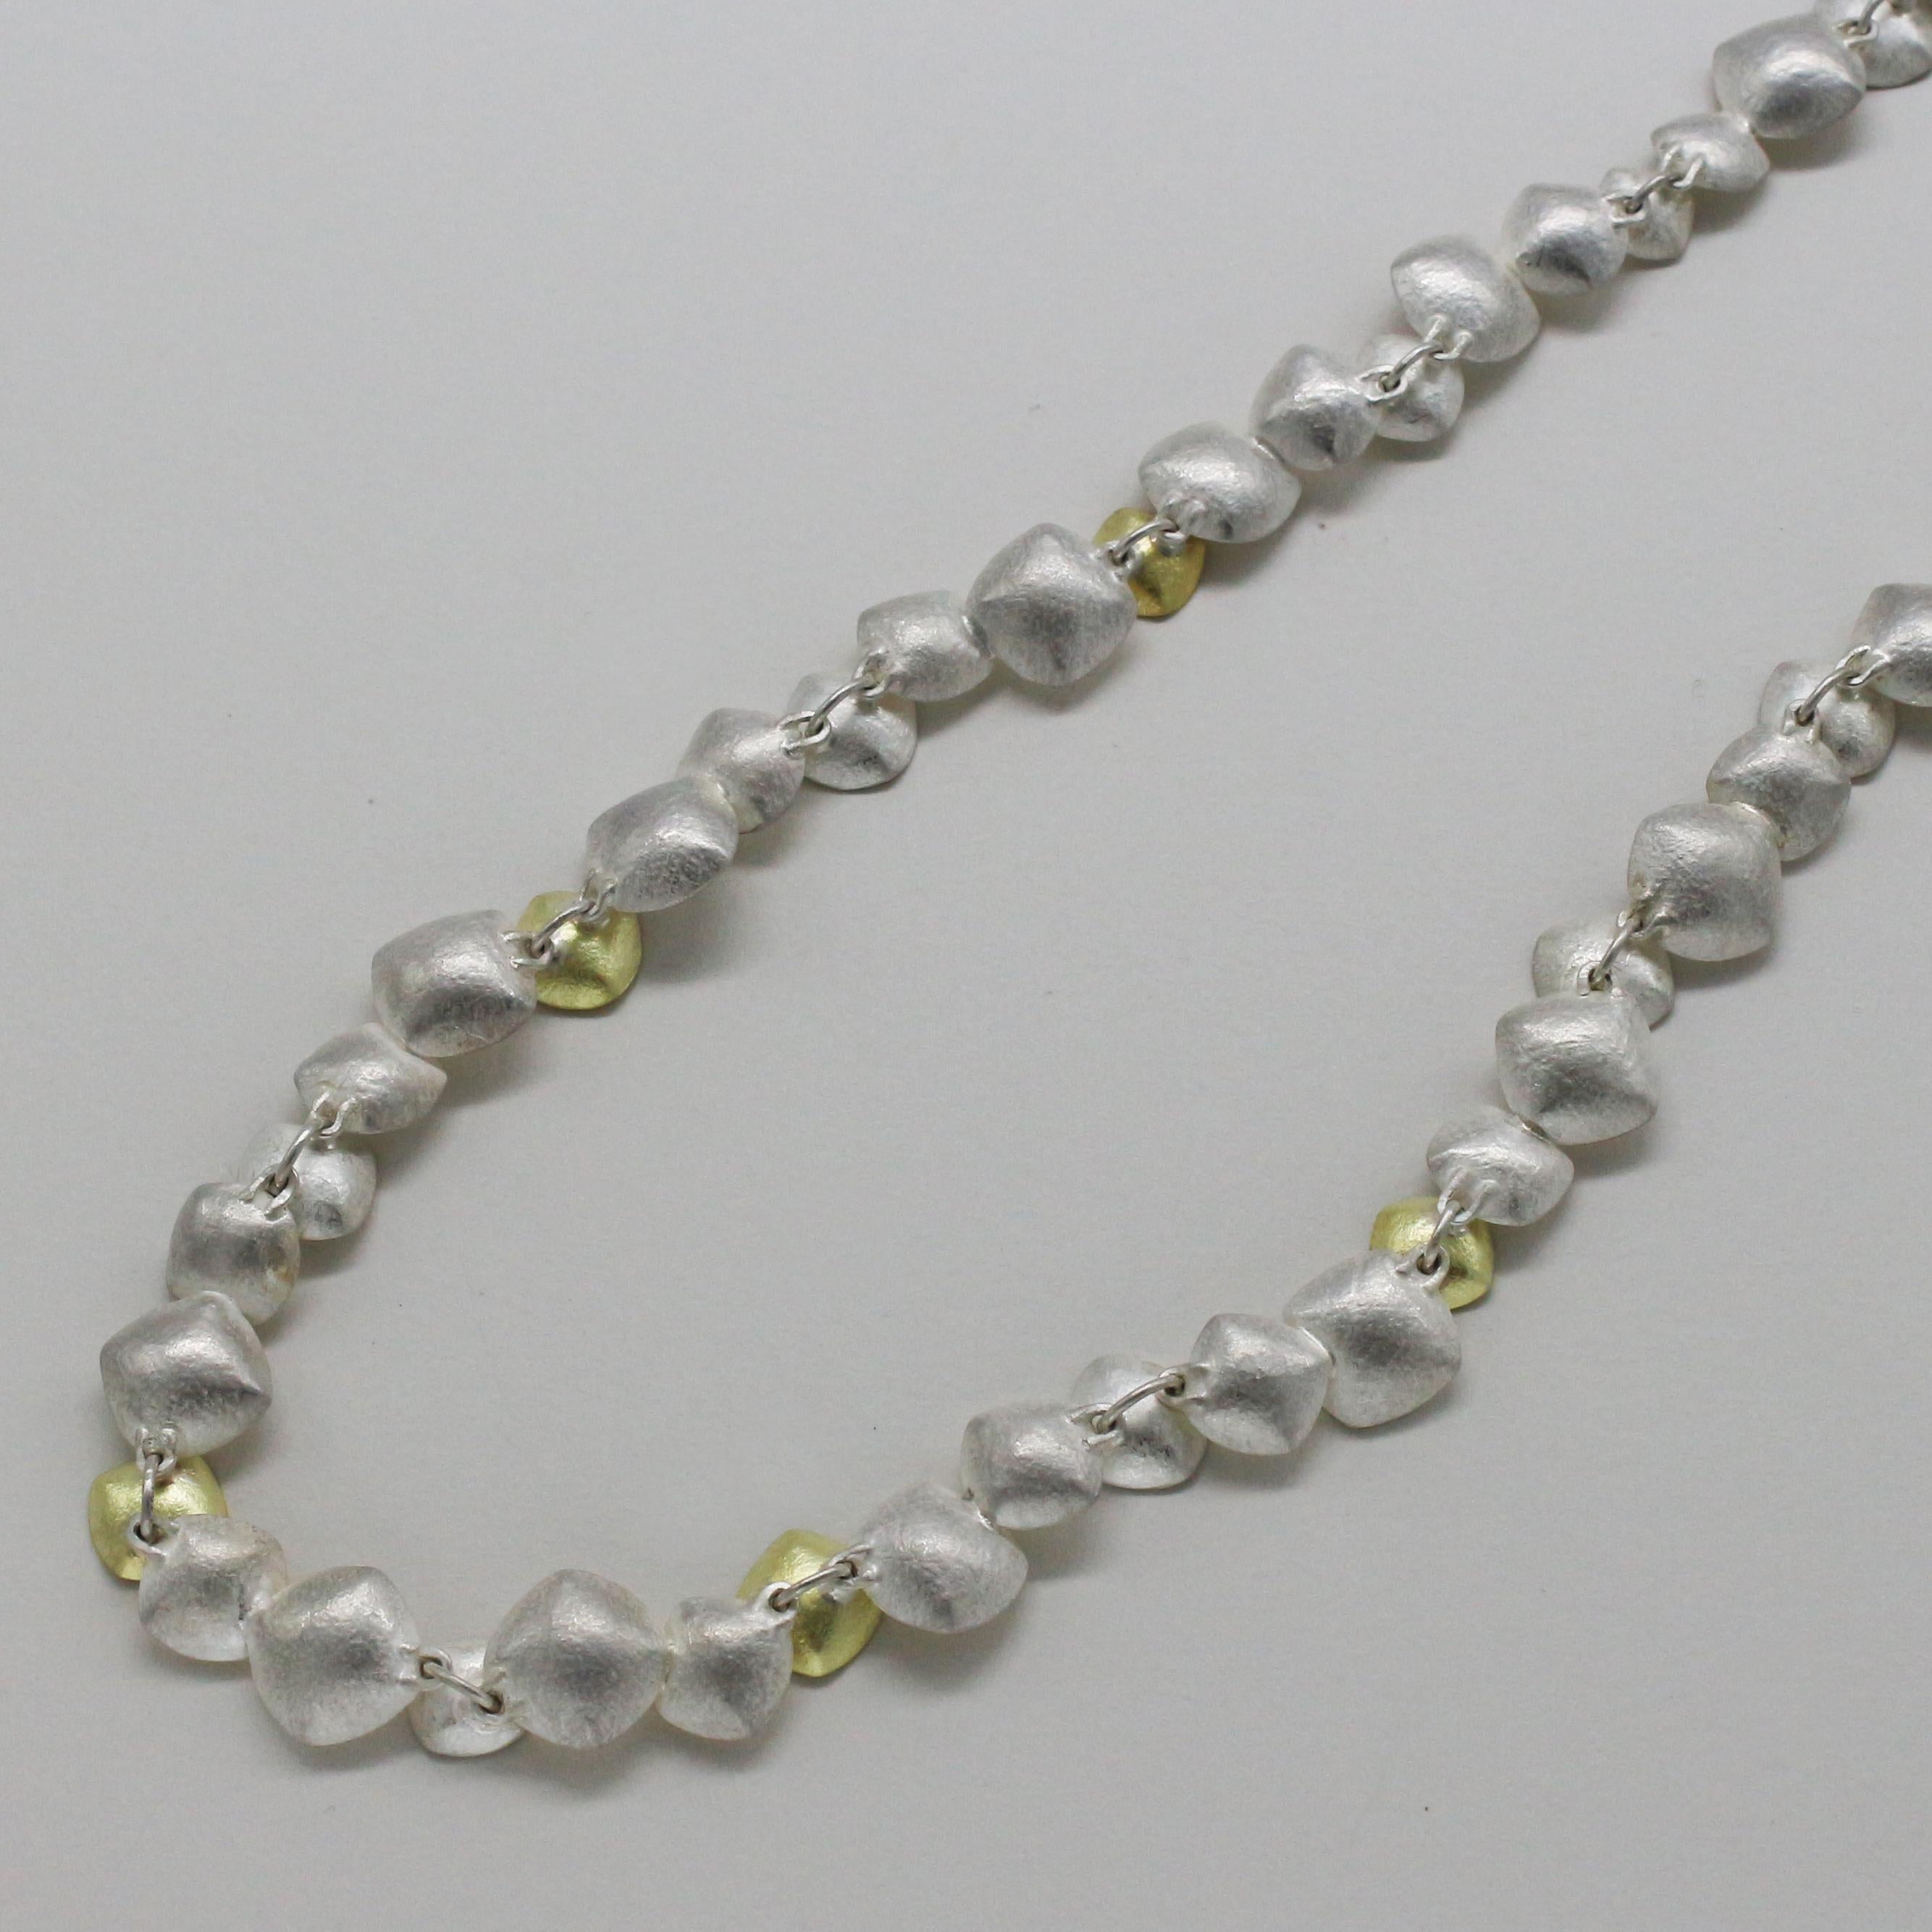 18 Karat Yellow Gold Sterling Silver Combination Choker Necklace, Kayo Saito In New Condition For Sale In Canterbury, Kent